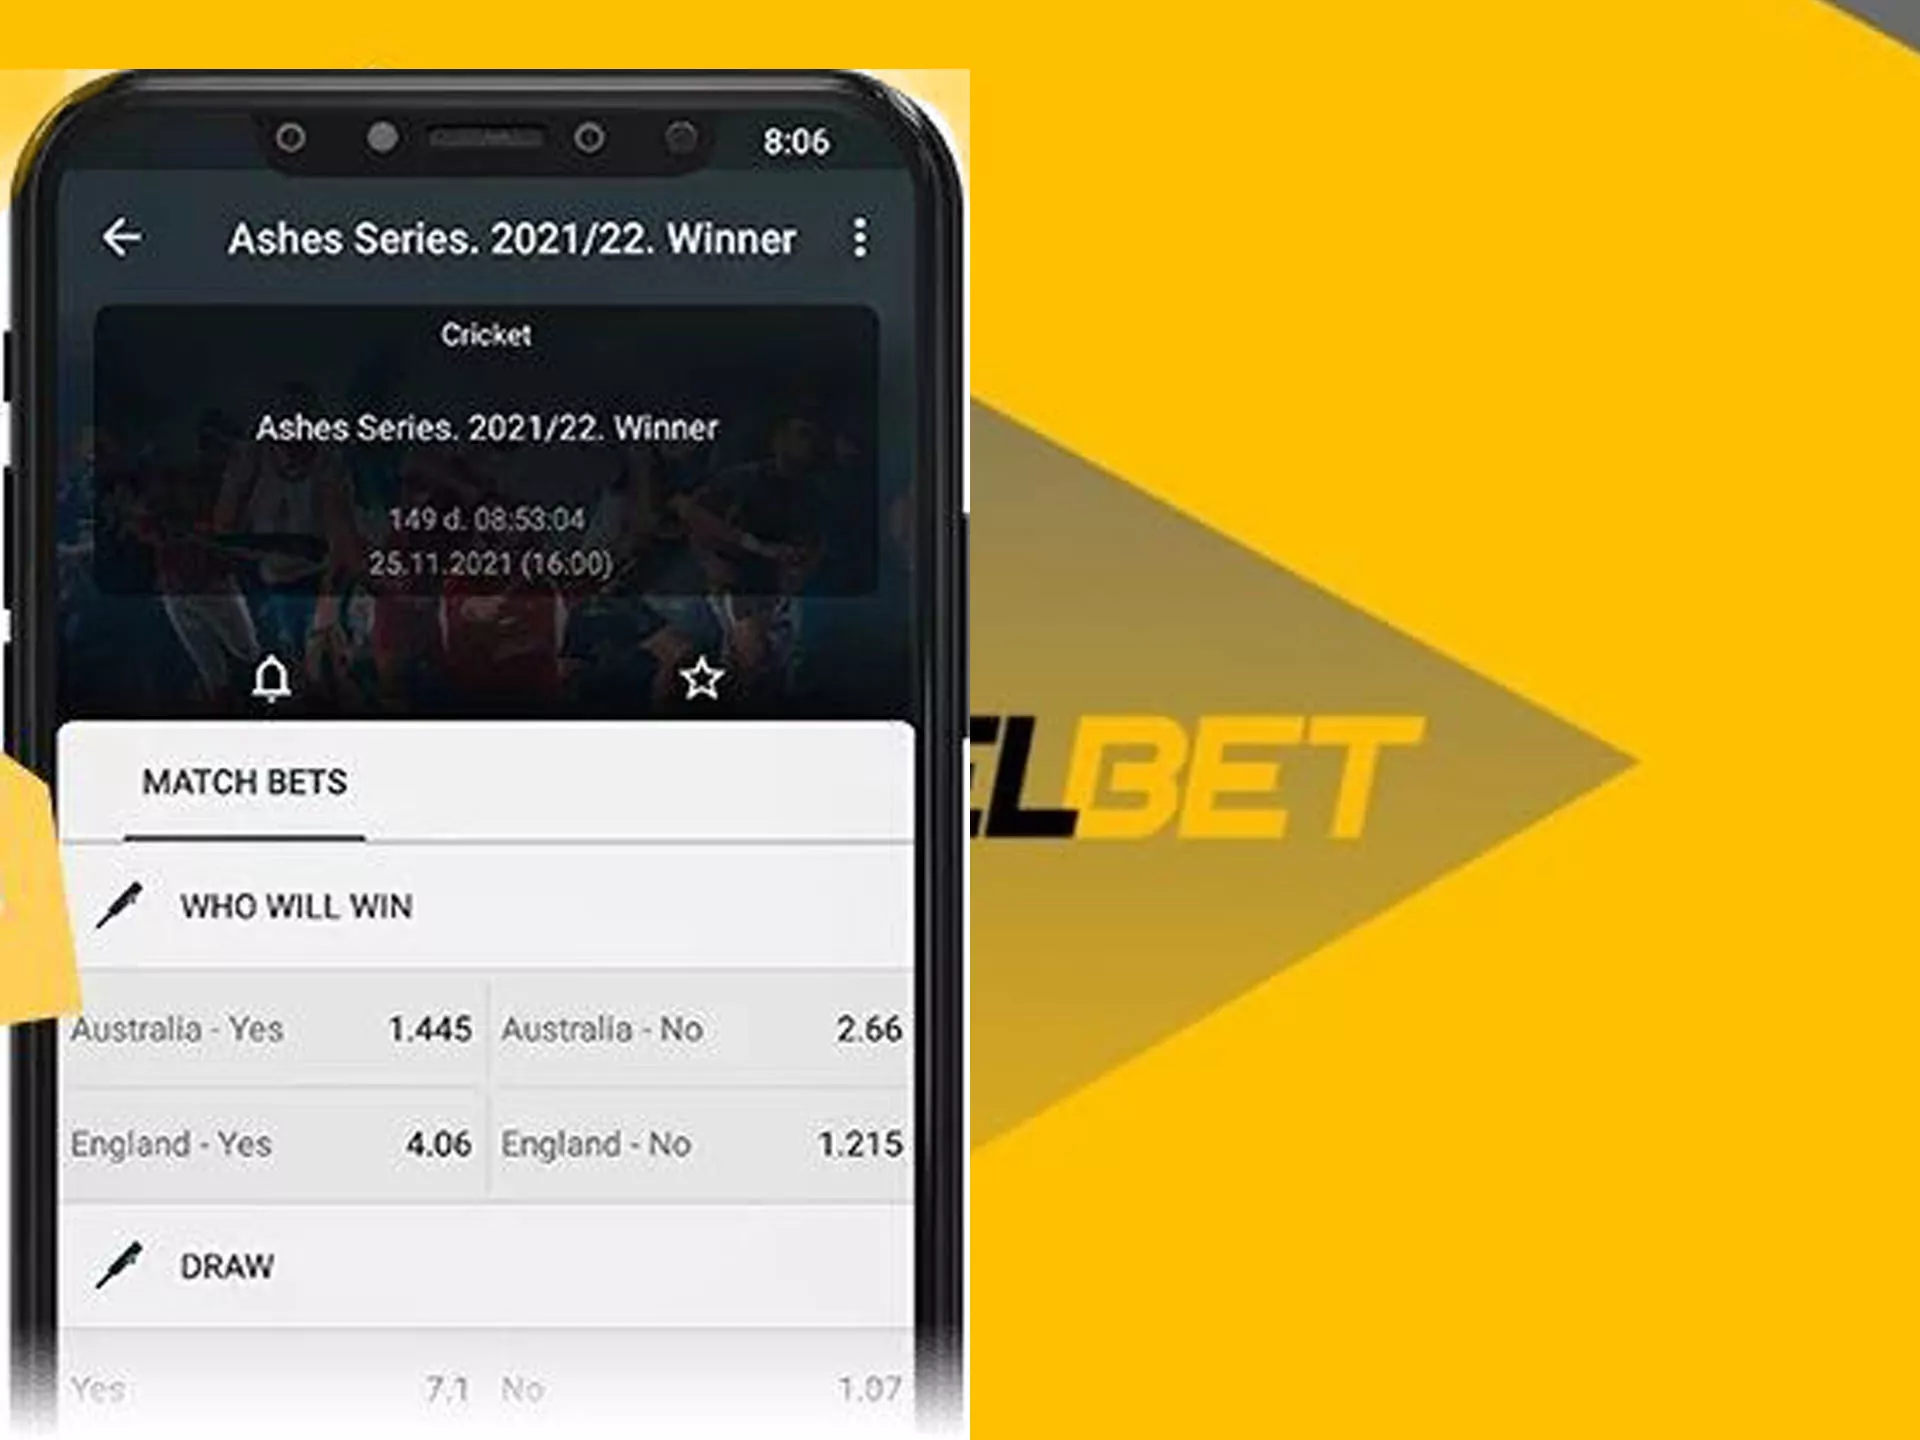 Step by step instruction on how to place a bet with melbet App.